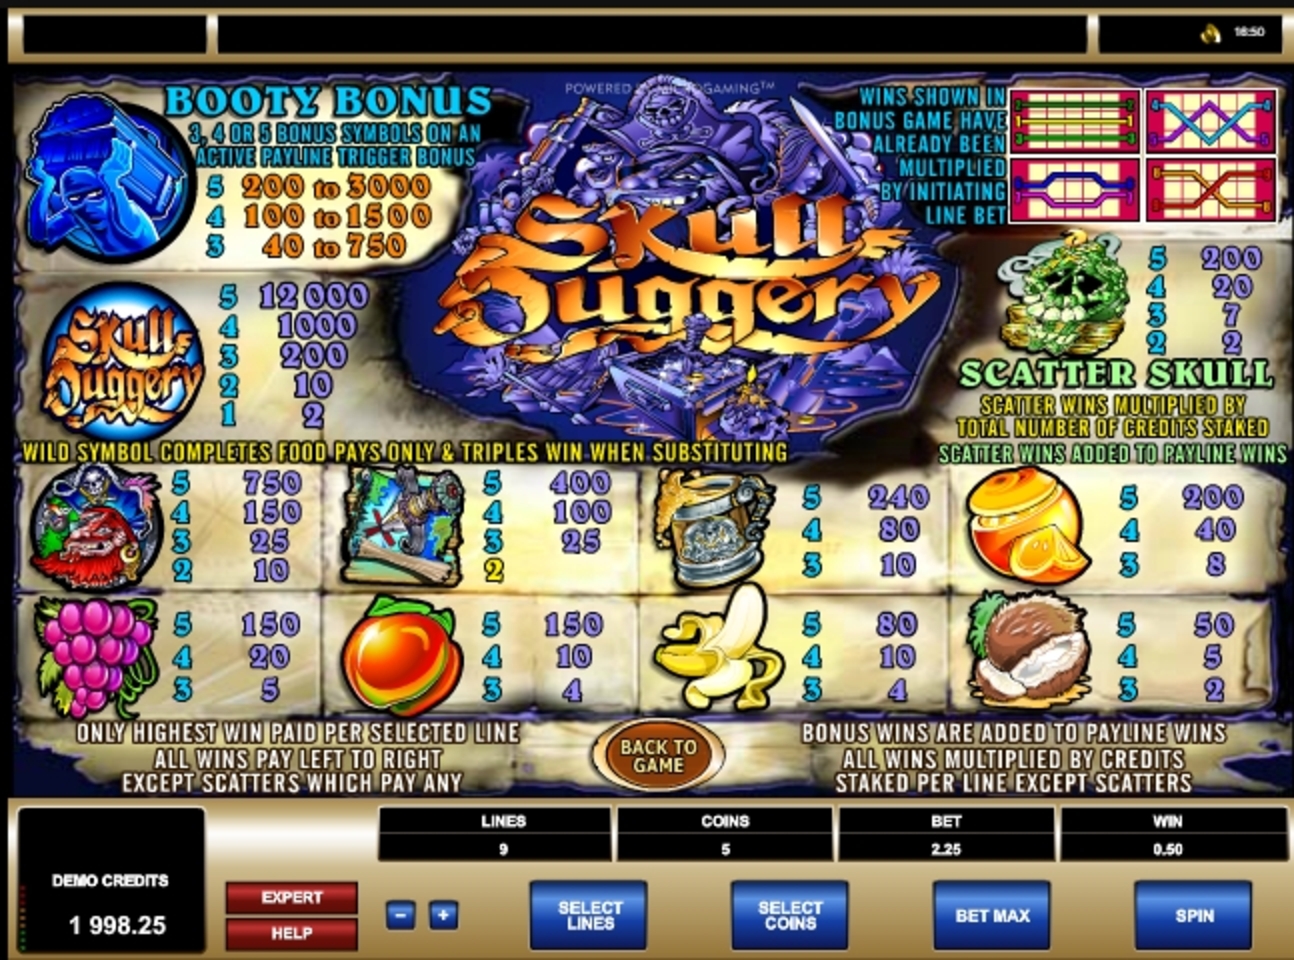 Info of Skull Duggery Slot Game by Microgaming